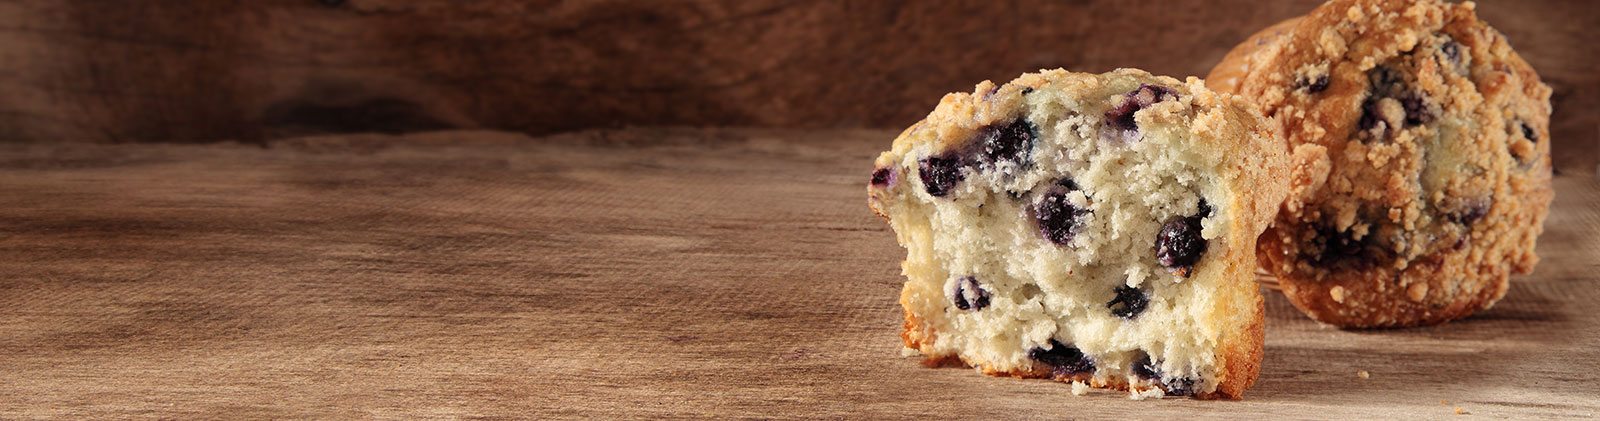 Moist, flavorful, loaded with wild blueberries